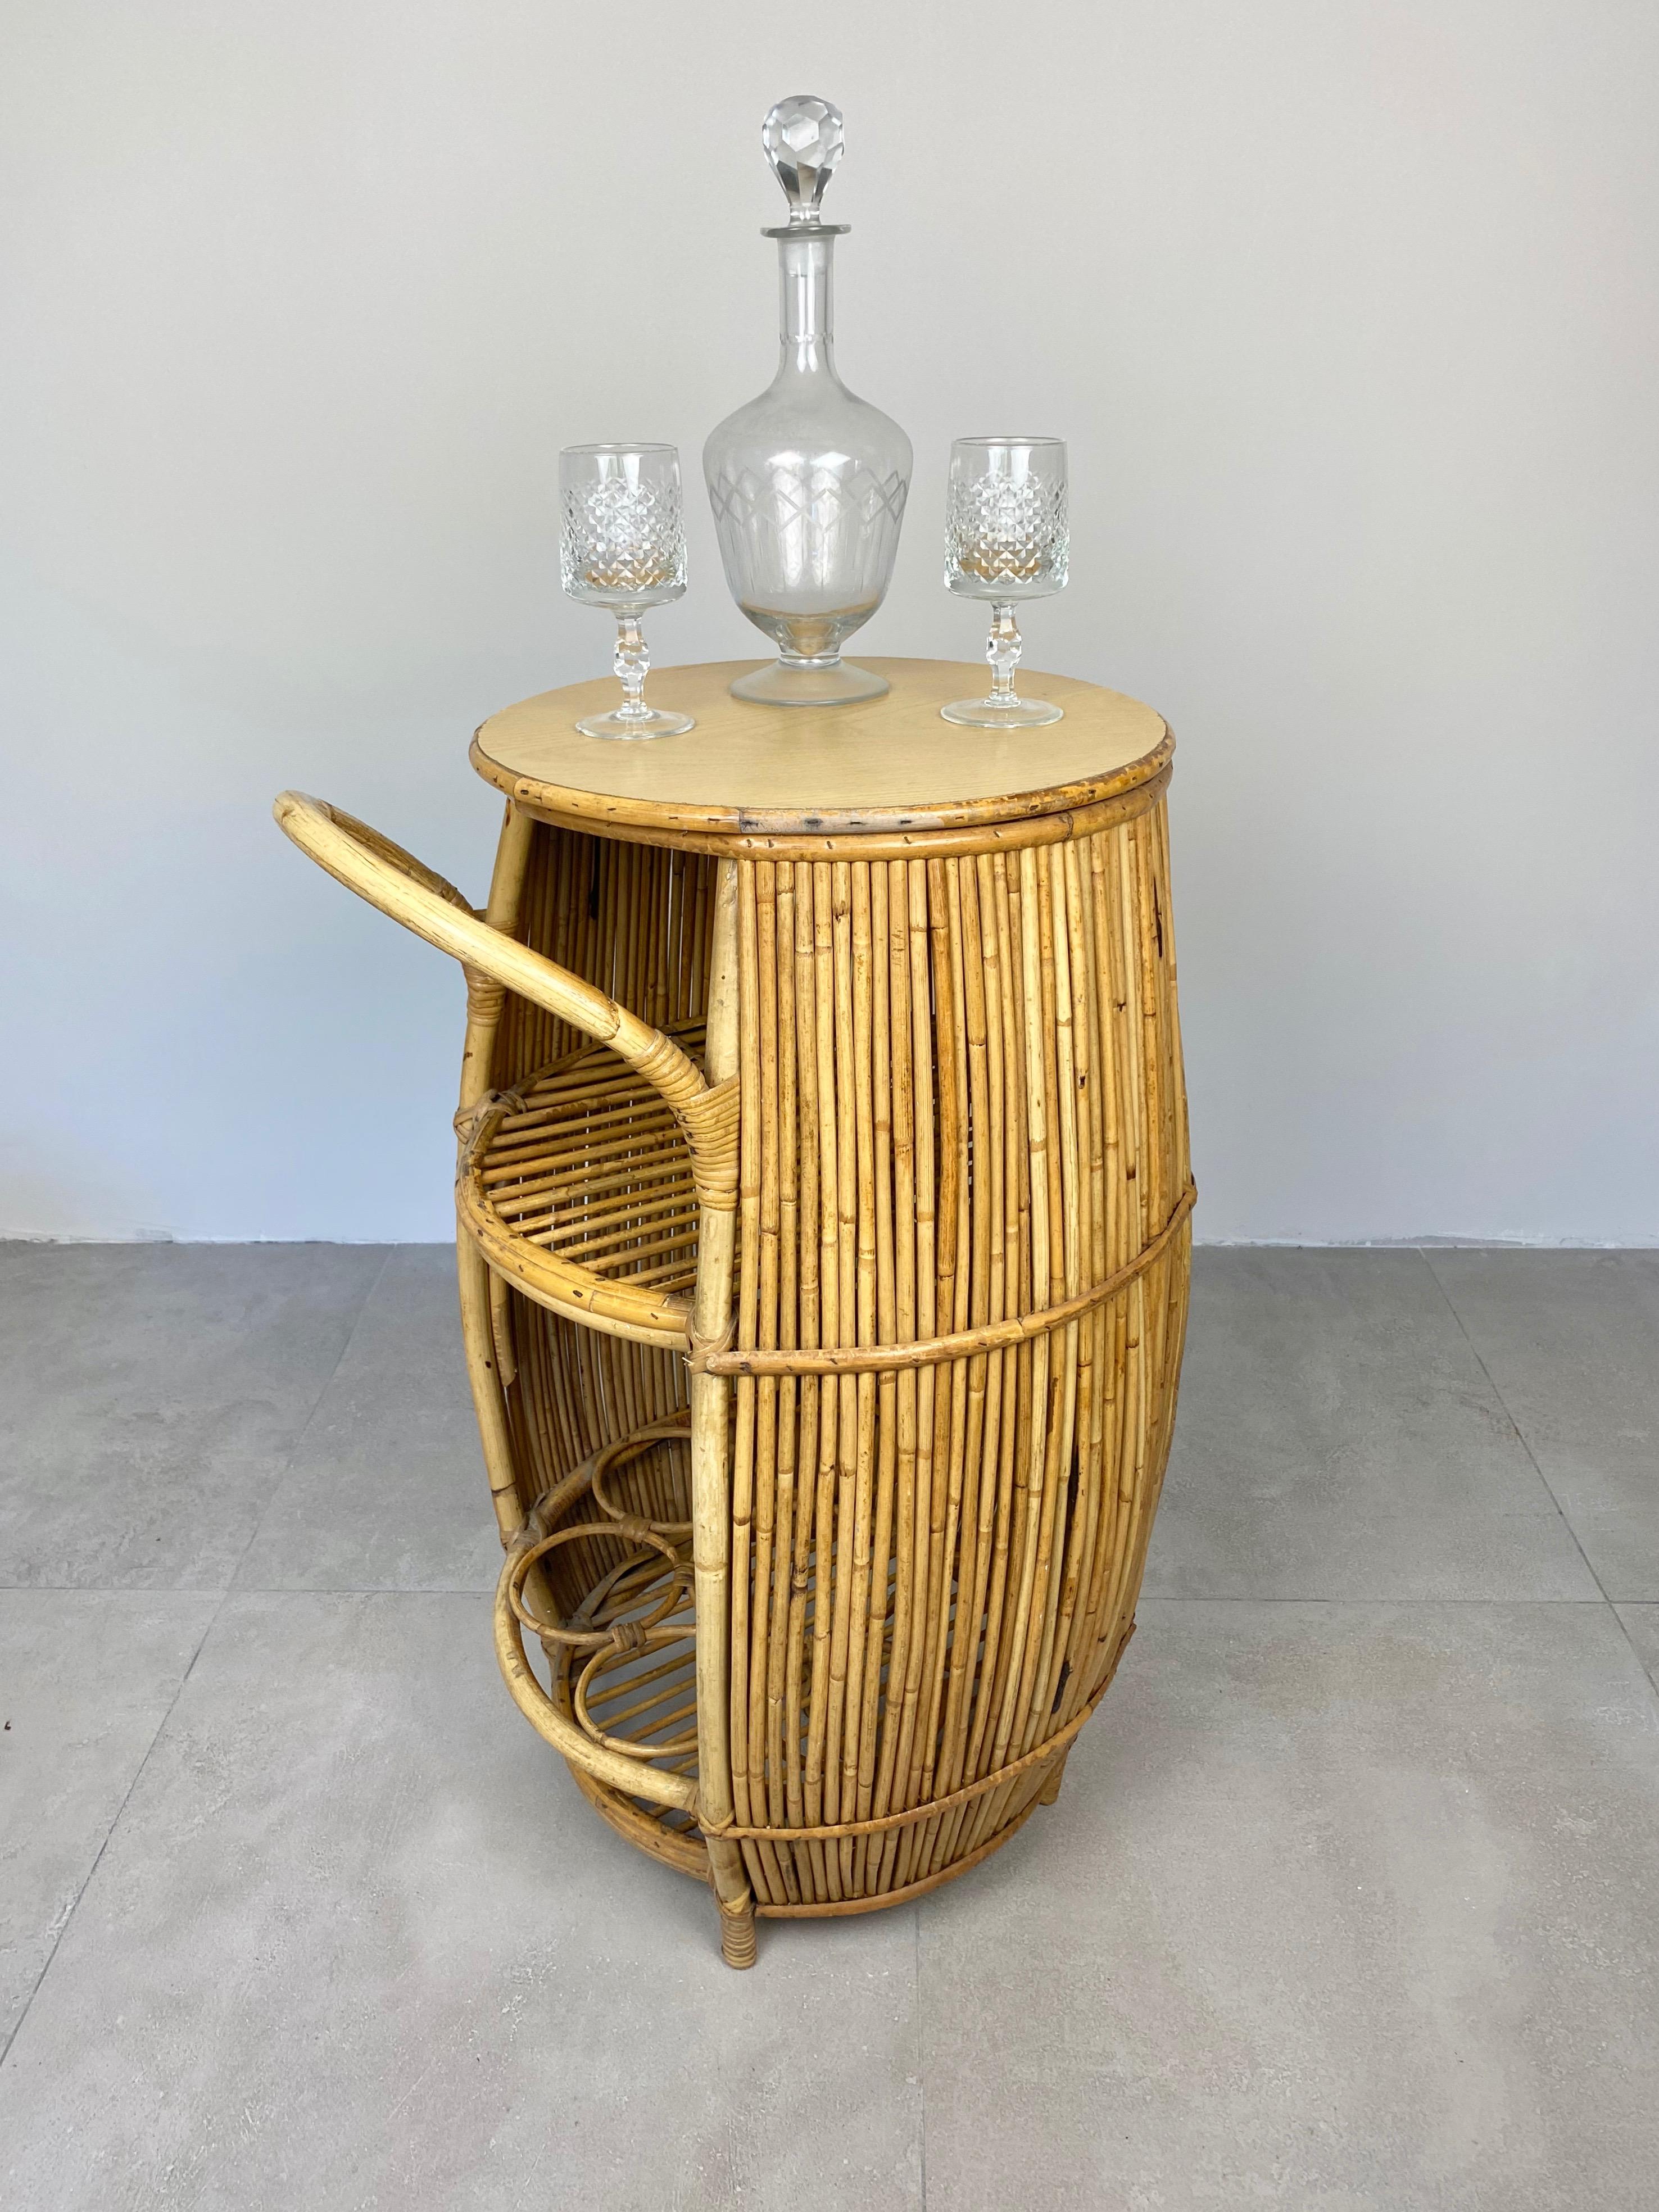 Formica Bamboo Rattan Barrel Bar Cart Cabinet, Italy, 1960s For Sale